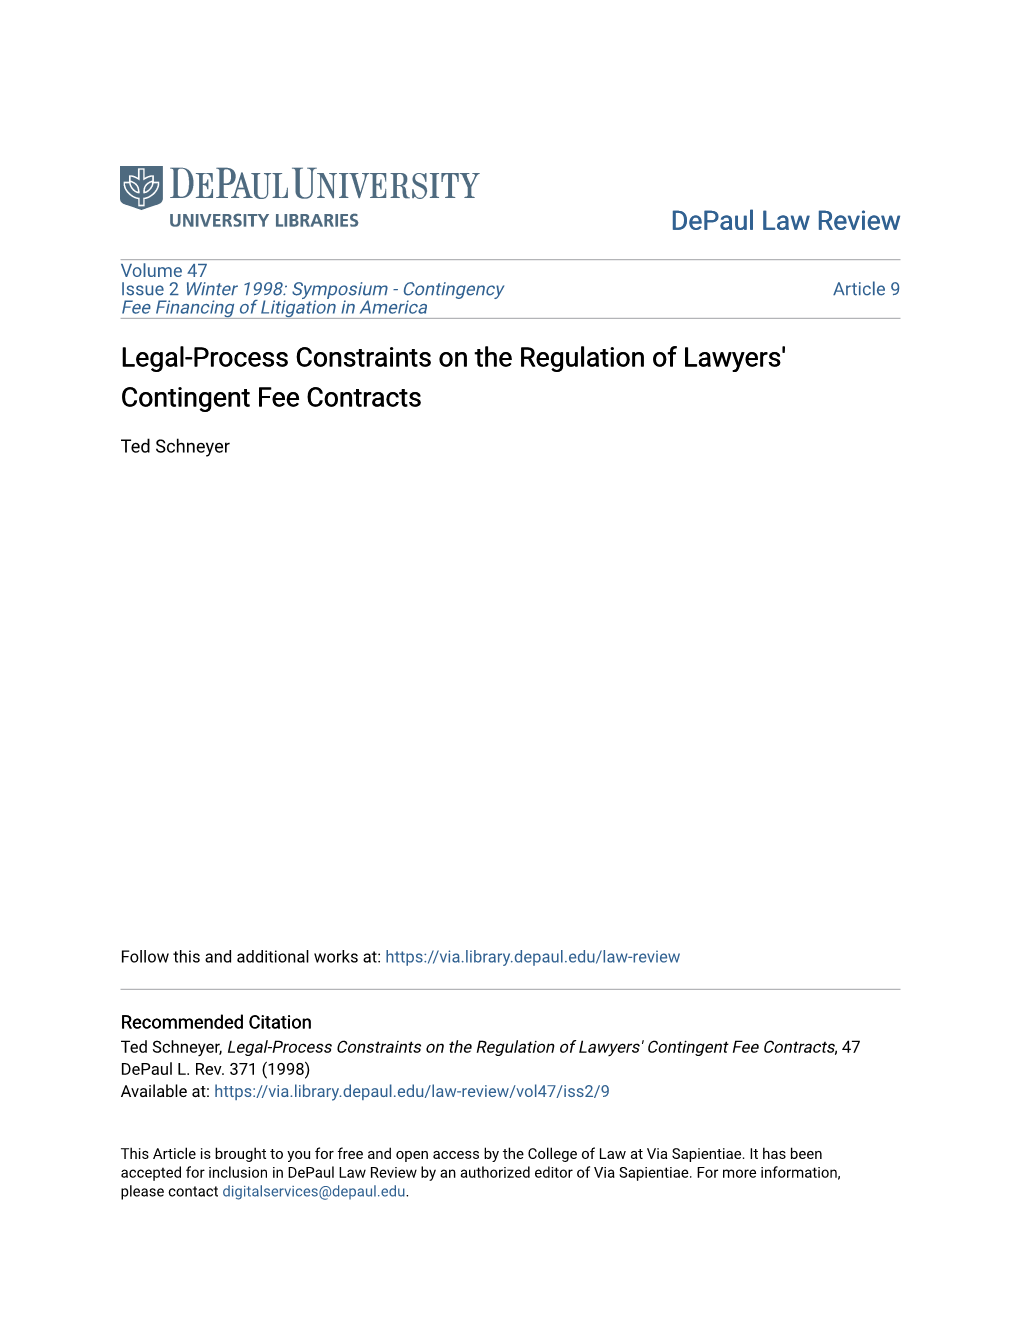 Legal-Process Constraints on the Regulation of Lawyers' Contingent Fee Contracts